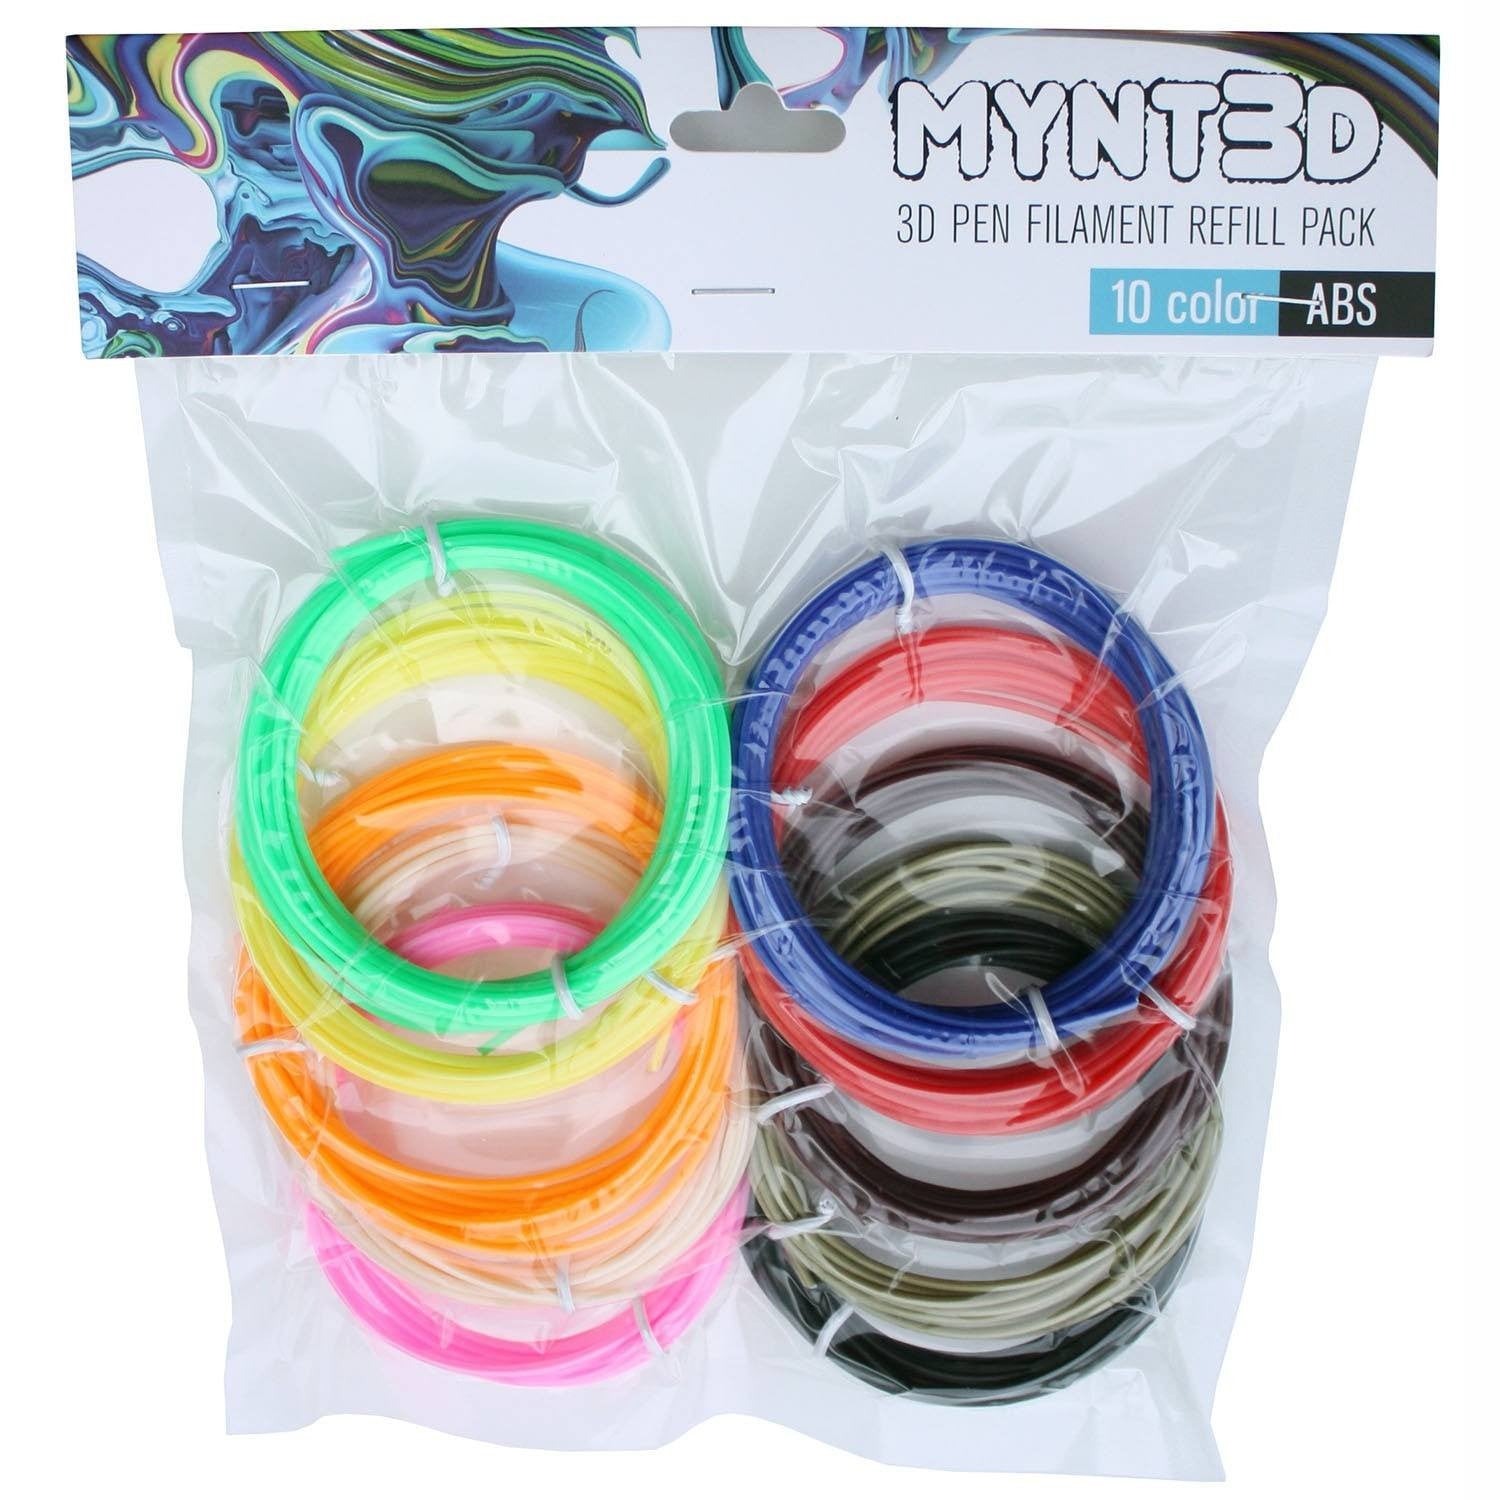 ABS Filament Refill Pack (10 color, 3m each)